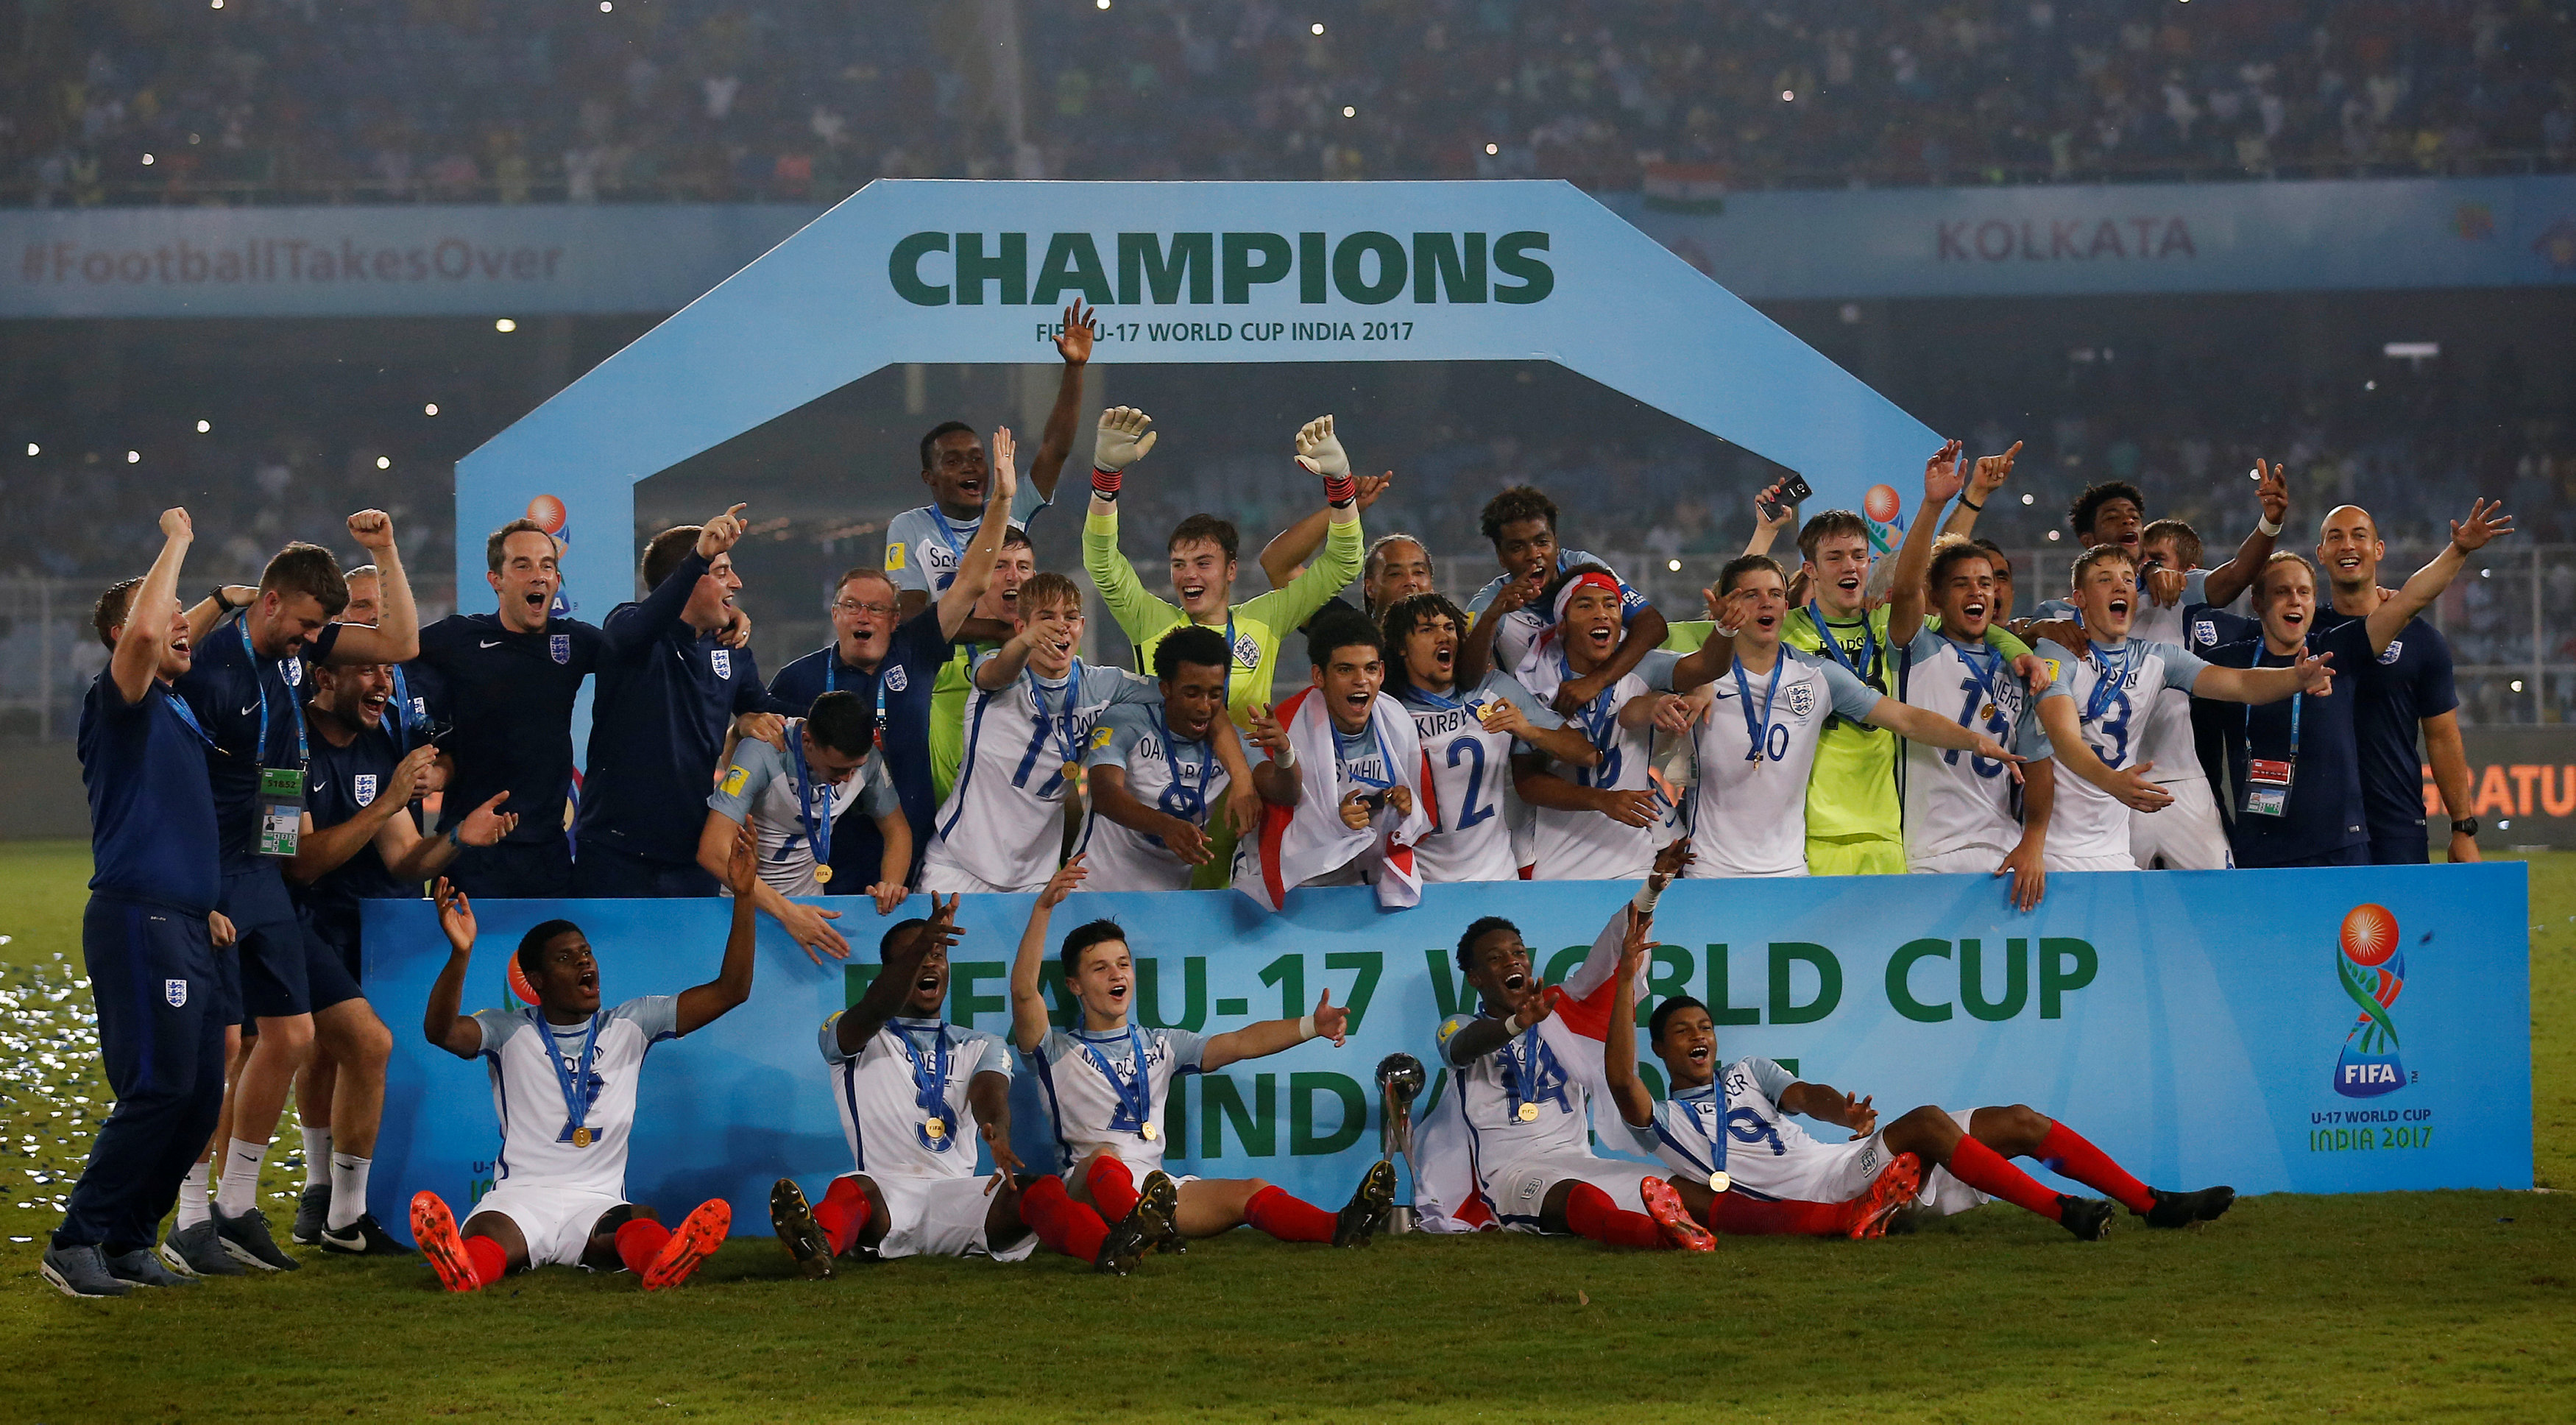 Football: Foden scores twice as England beat Spain to lift maiden U-17 World Cup